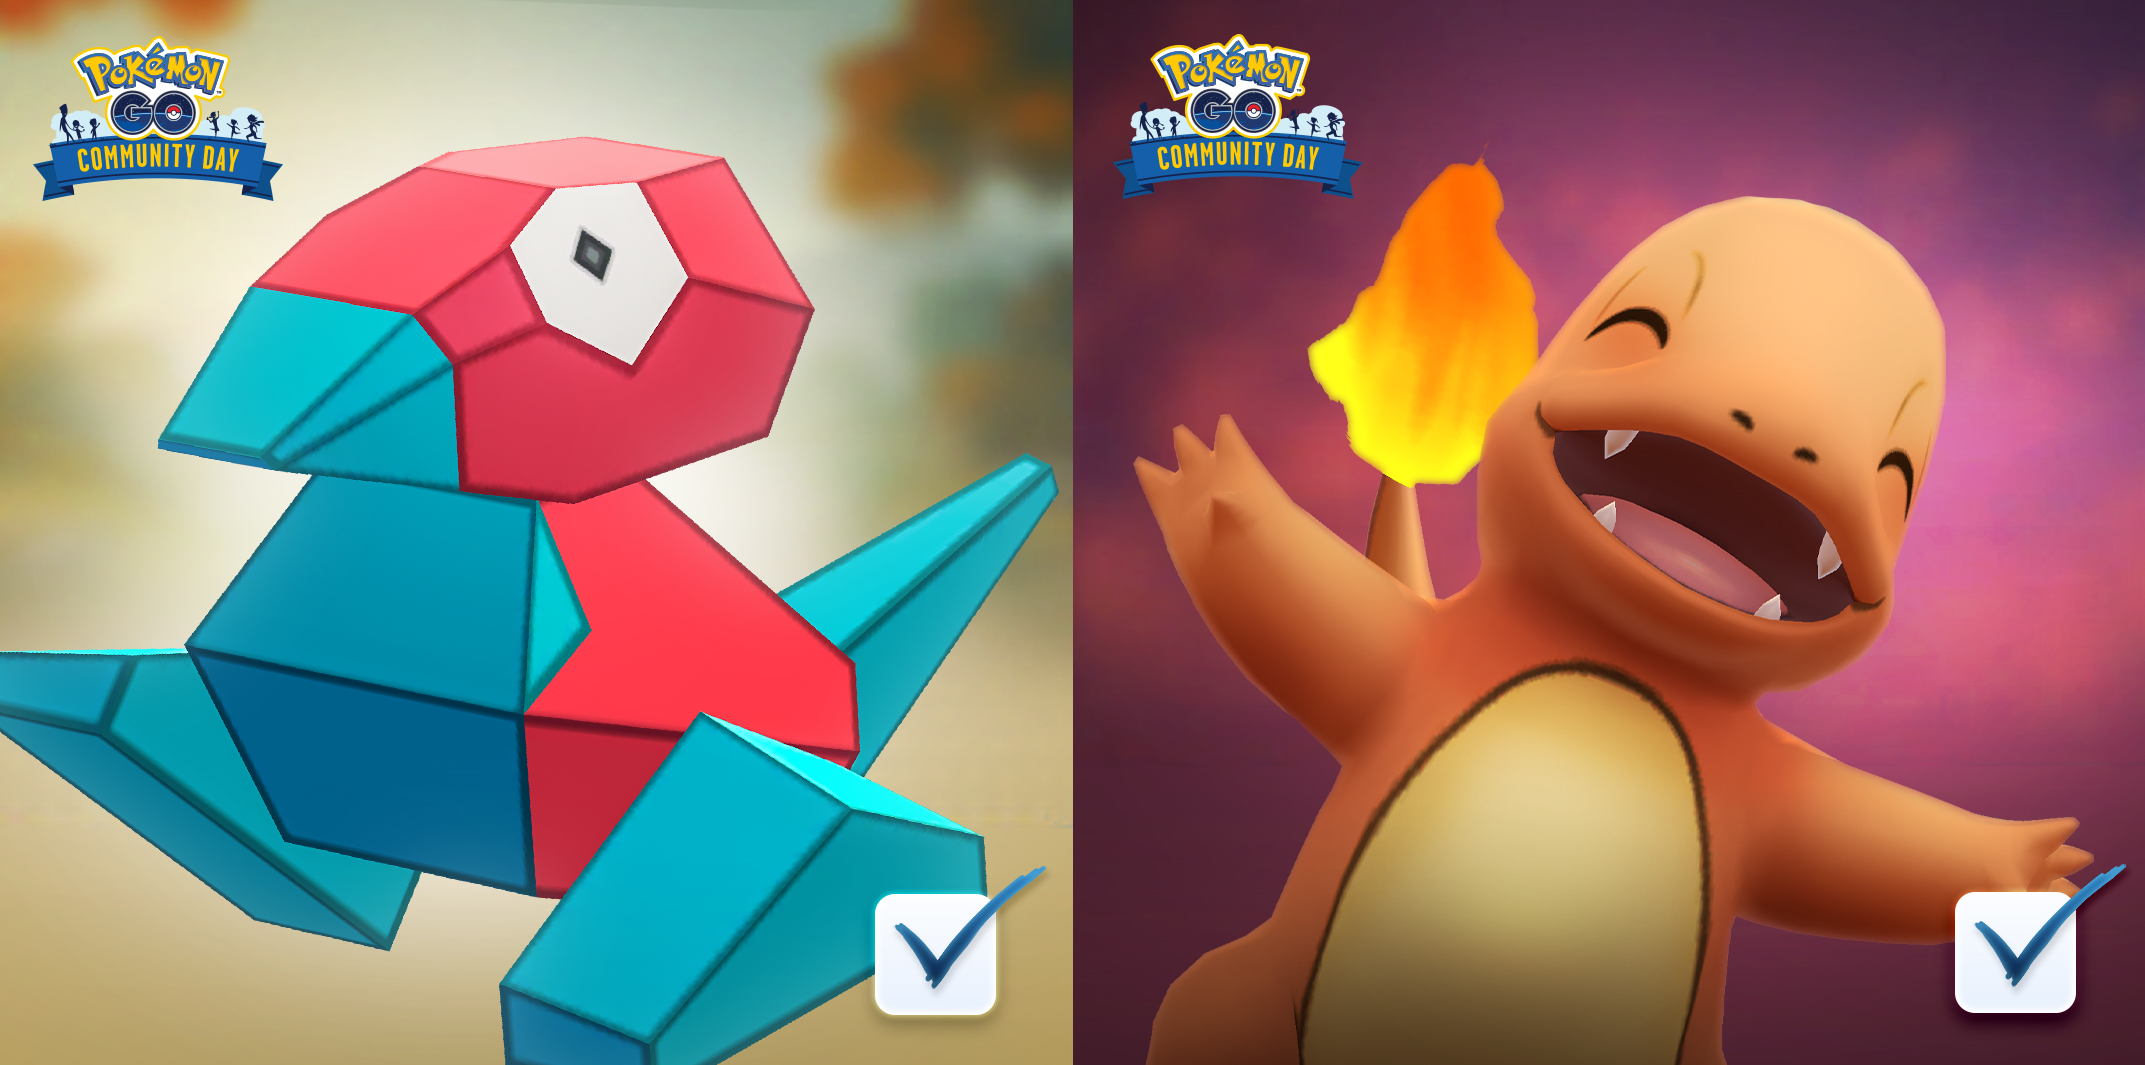 Pokemon Go Sept 2020 Community Day To Feature Porygon Oct 2020 To Feature Charmander Best Curated Esports And Gaming News For Southeast Asia And Beyond At Your Fingertips - beyond roblox codes 2018 september